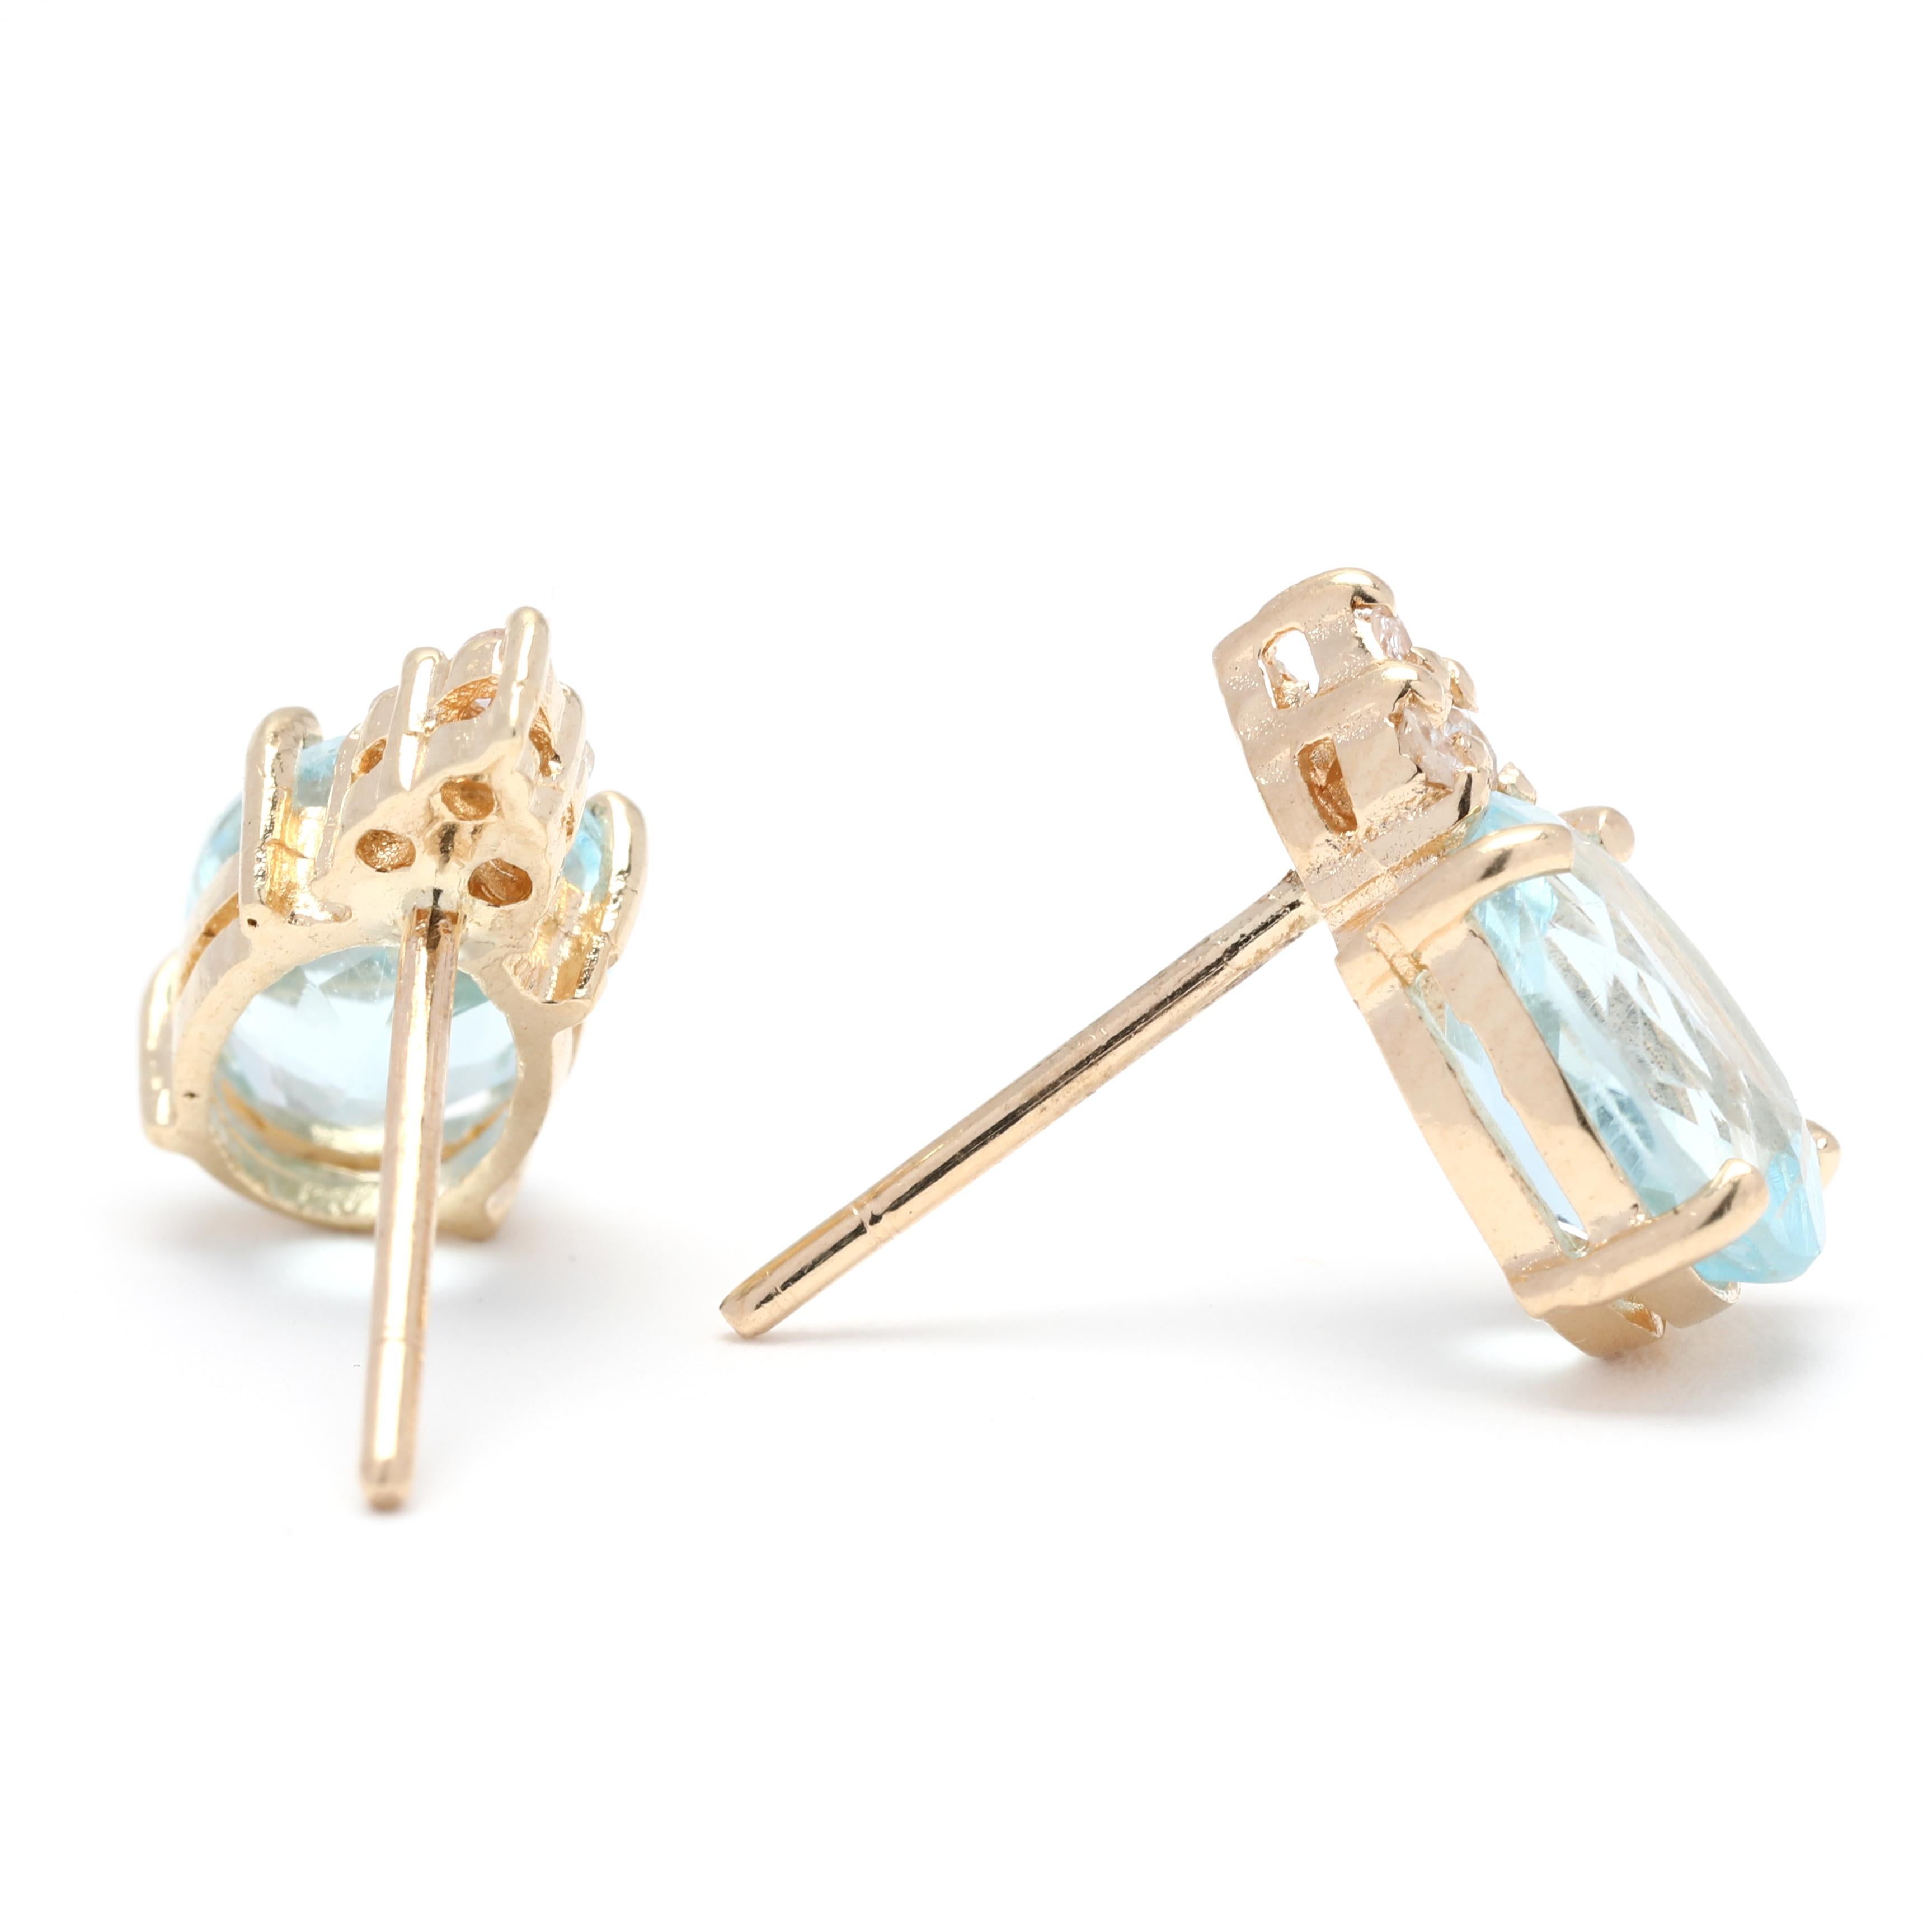 These stunning blue topaz diamond stud earrings are a beautiful and elegant accessory for any occasion. Crafted in 14K yellow gold, the earrings feature two 1.62 carat blue topaz stones, totaling 3.25 carats. The oval-shaped topaz stones are